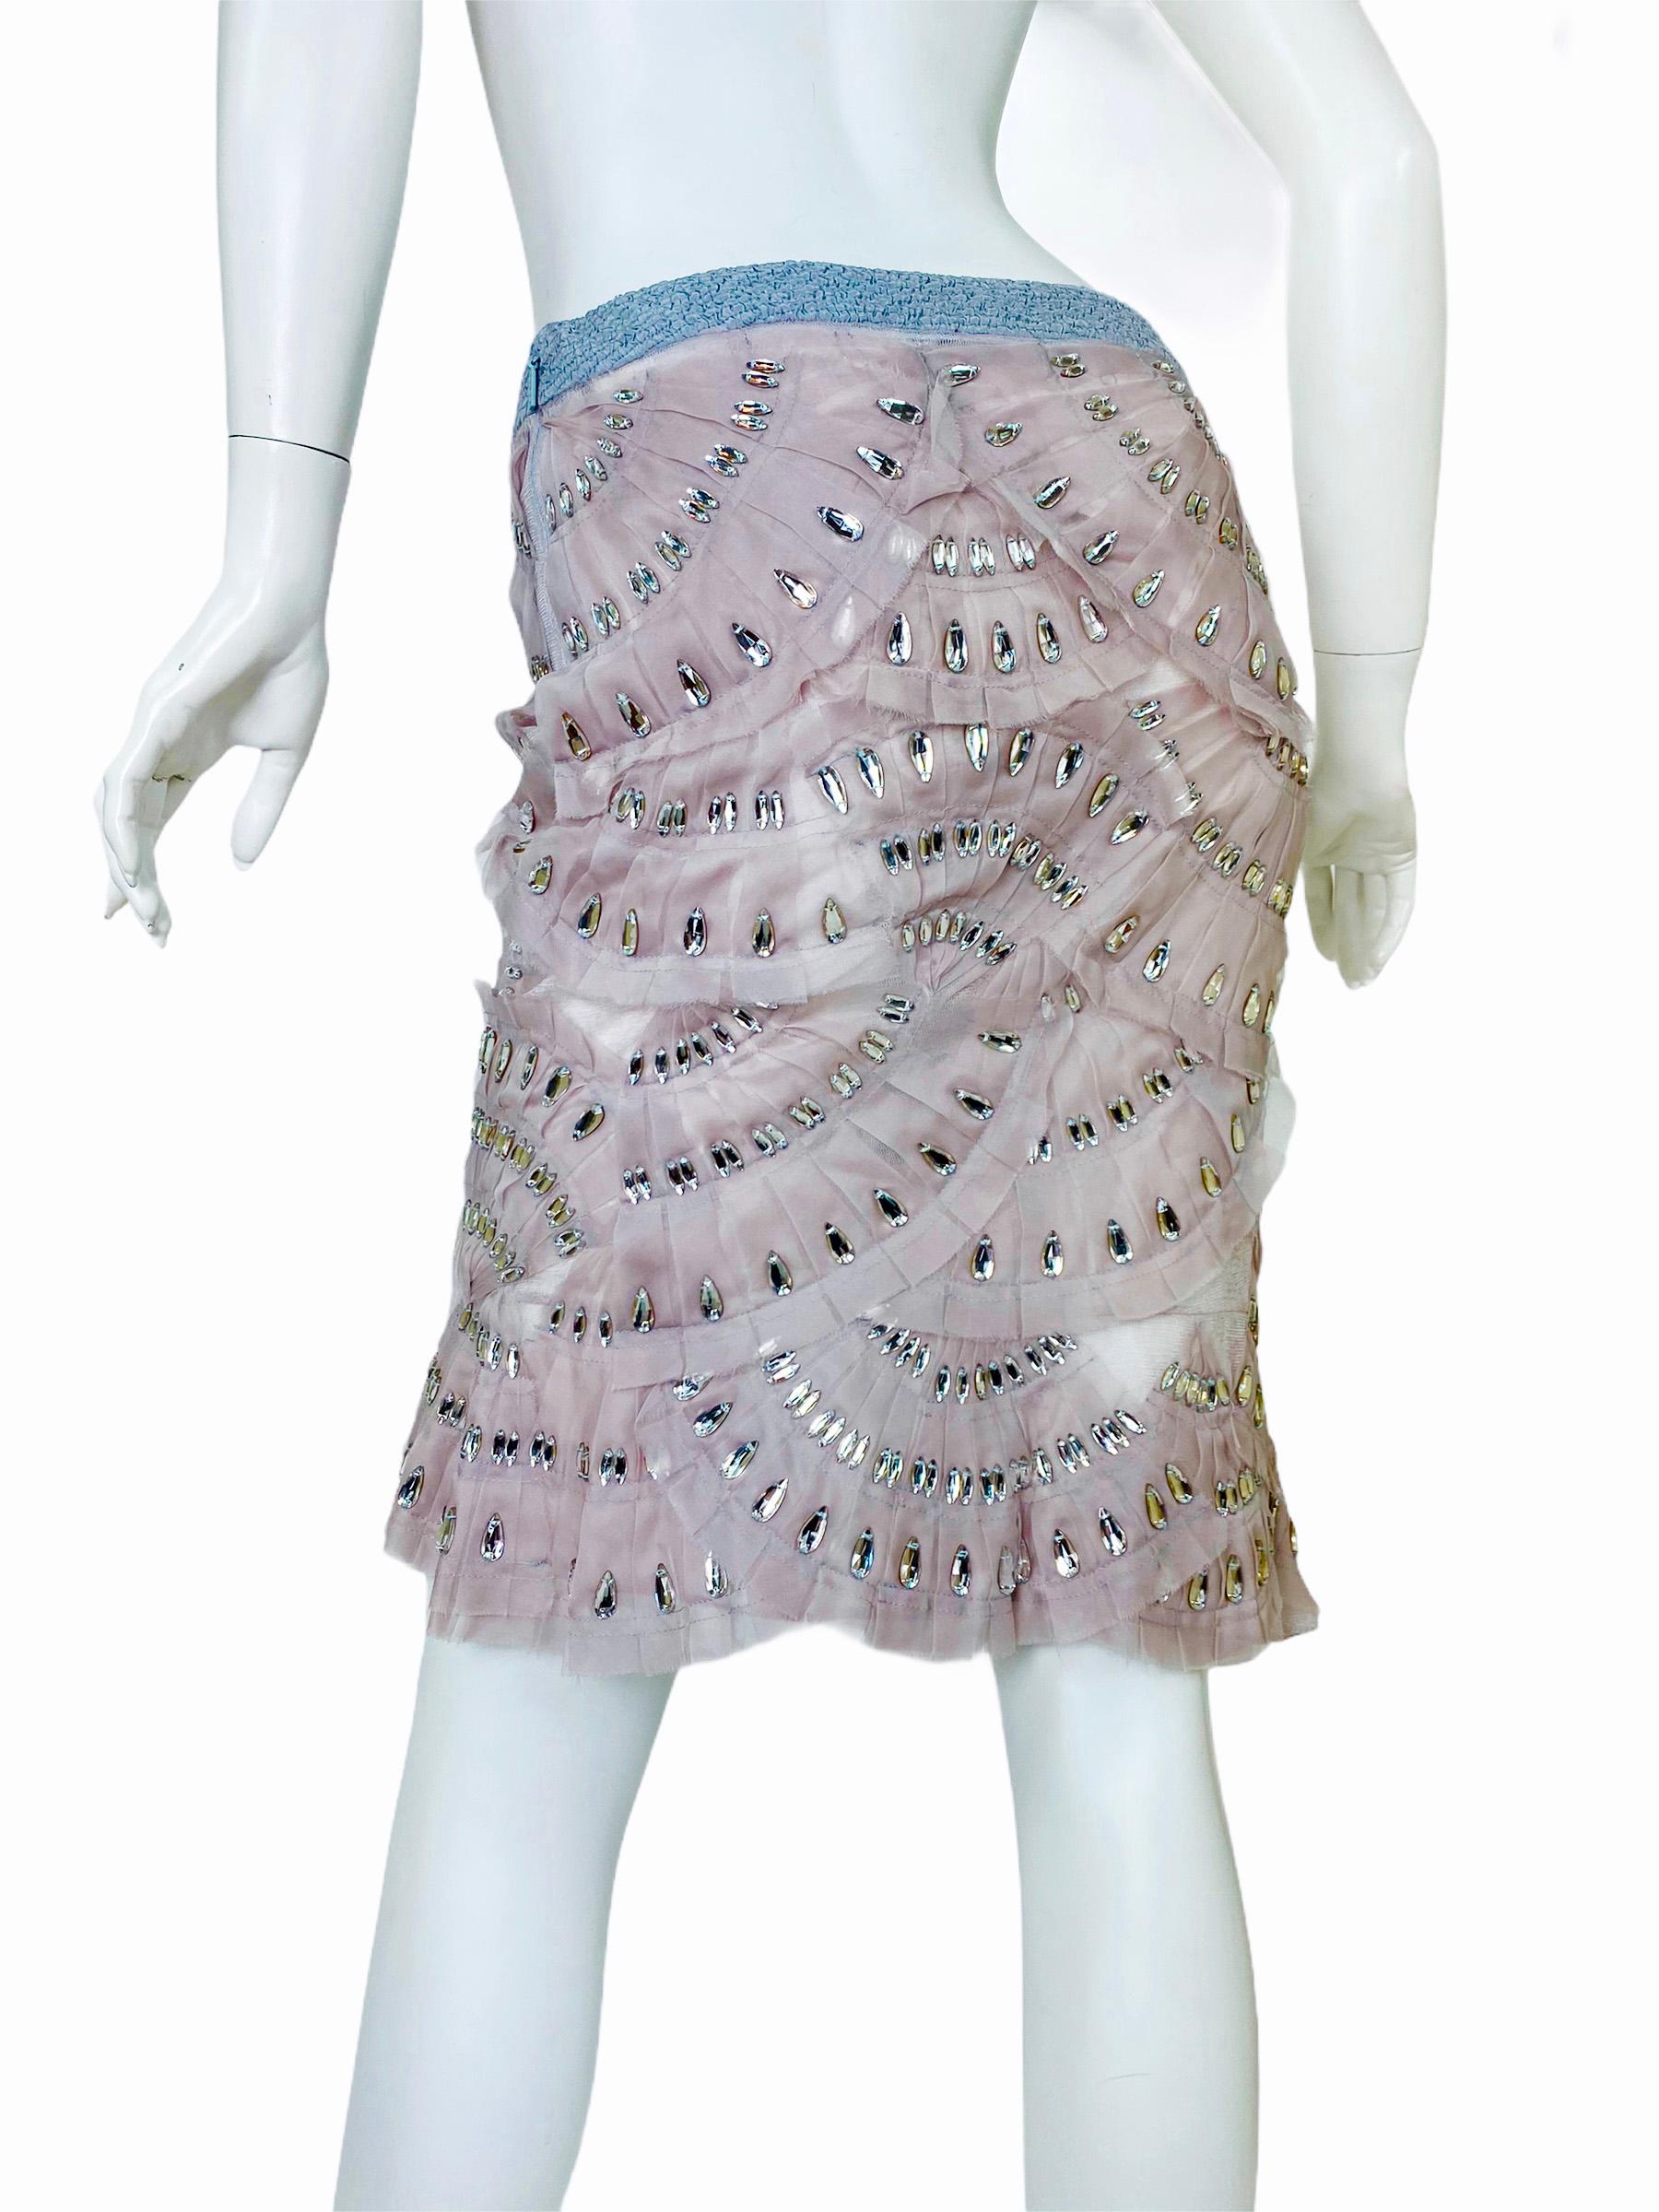 Women's Tom Ford for Gucci Crystal Embellished Skirt, S/S 2004 